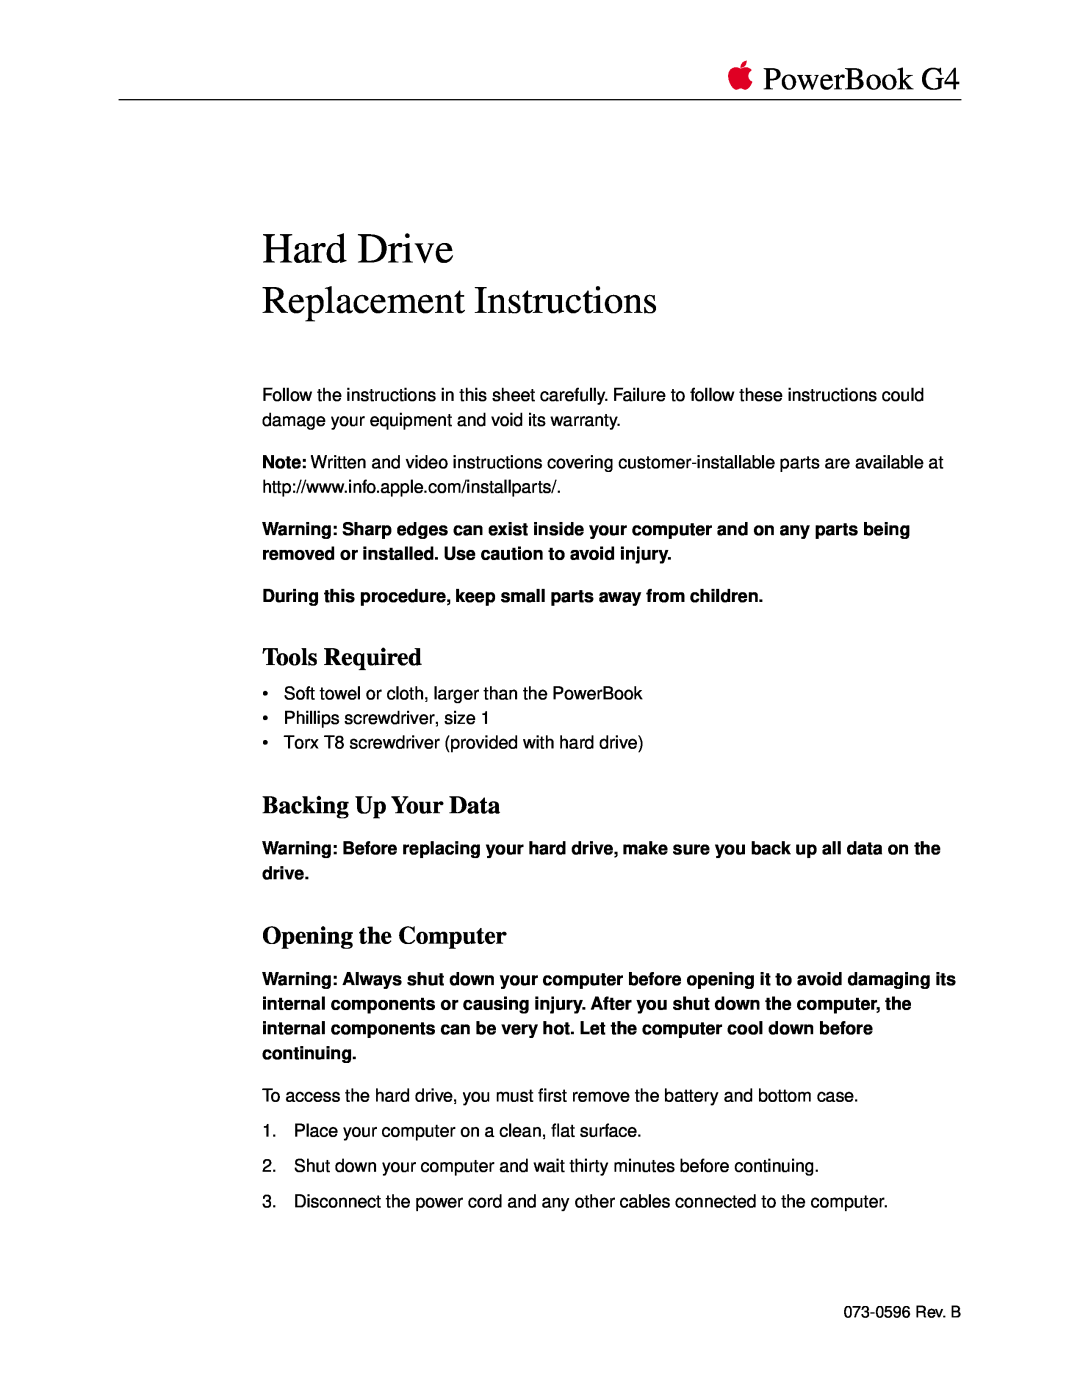 Apple Hard Drive warranty Tools Required, Backing Up Your Data, Opening the Computer, Replacement Instructions 